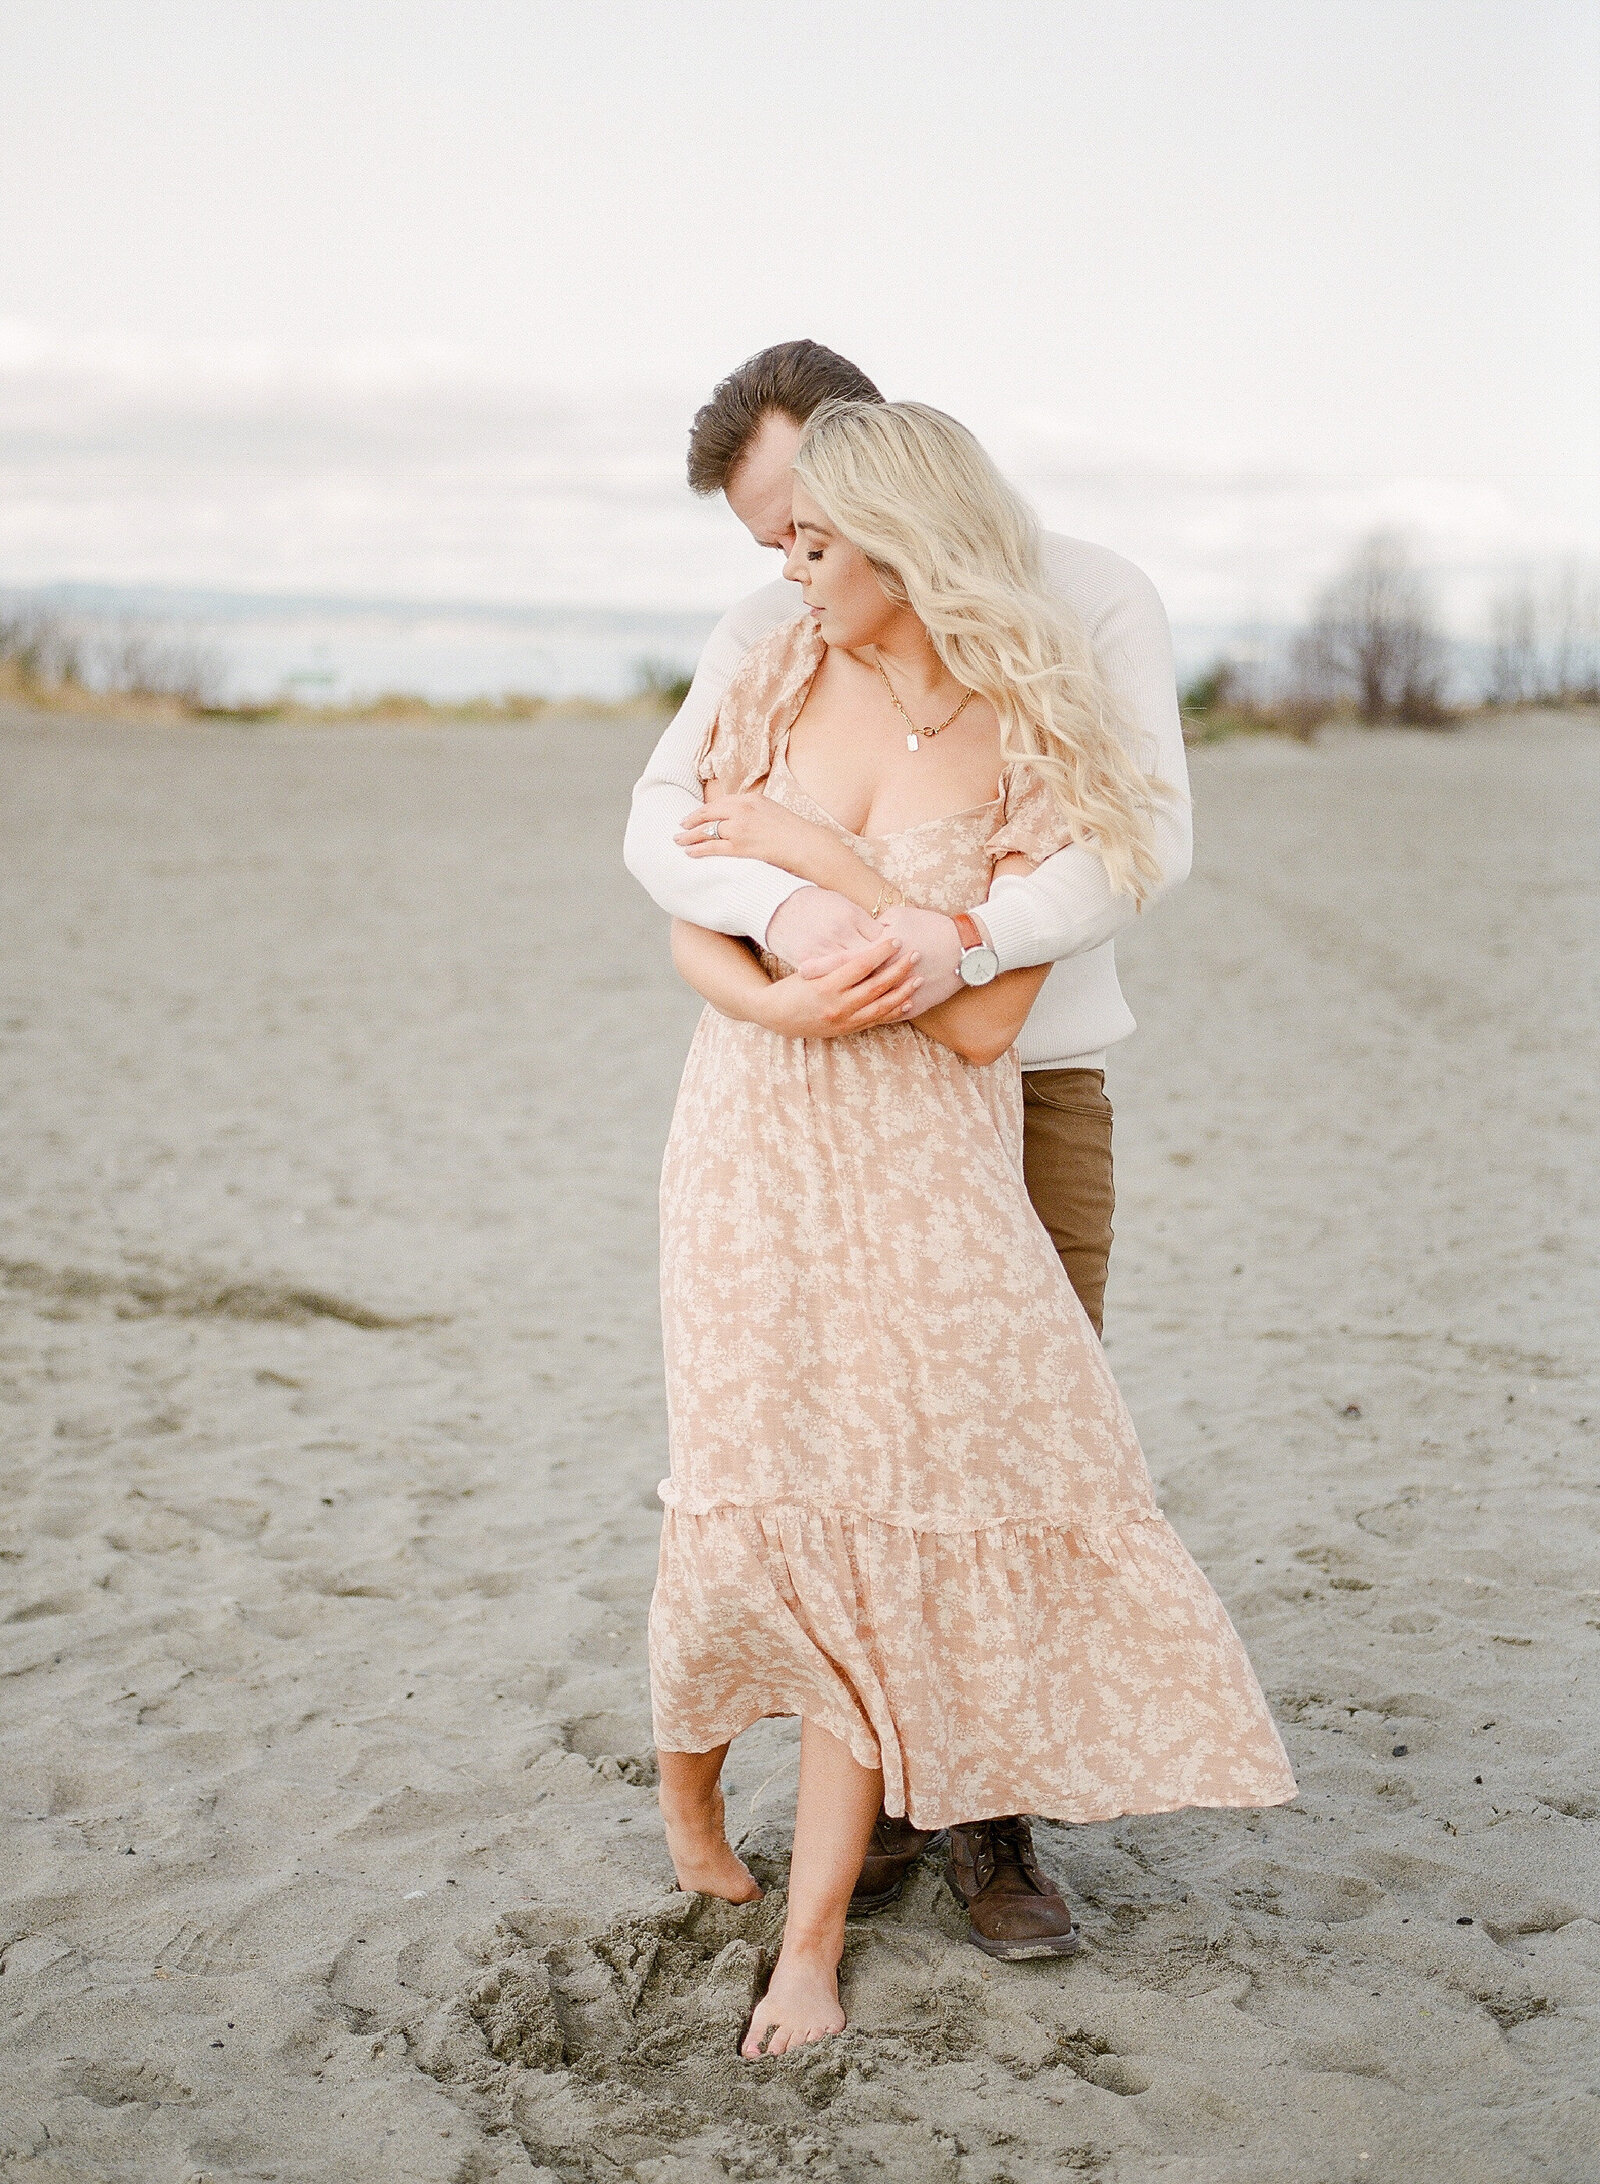 Brittany and Steven - Golden Gardens Park - Kerry Jeanne Photography (143 of 200)